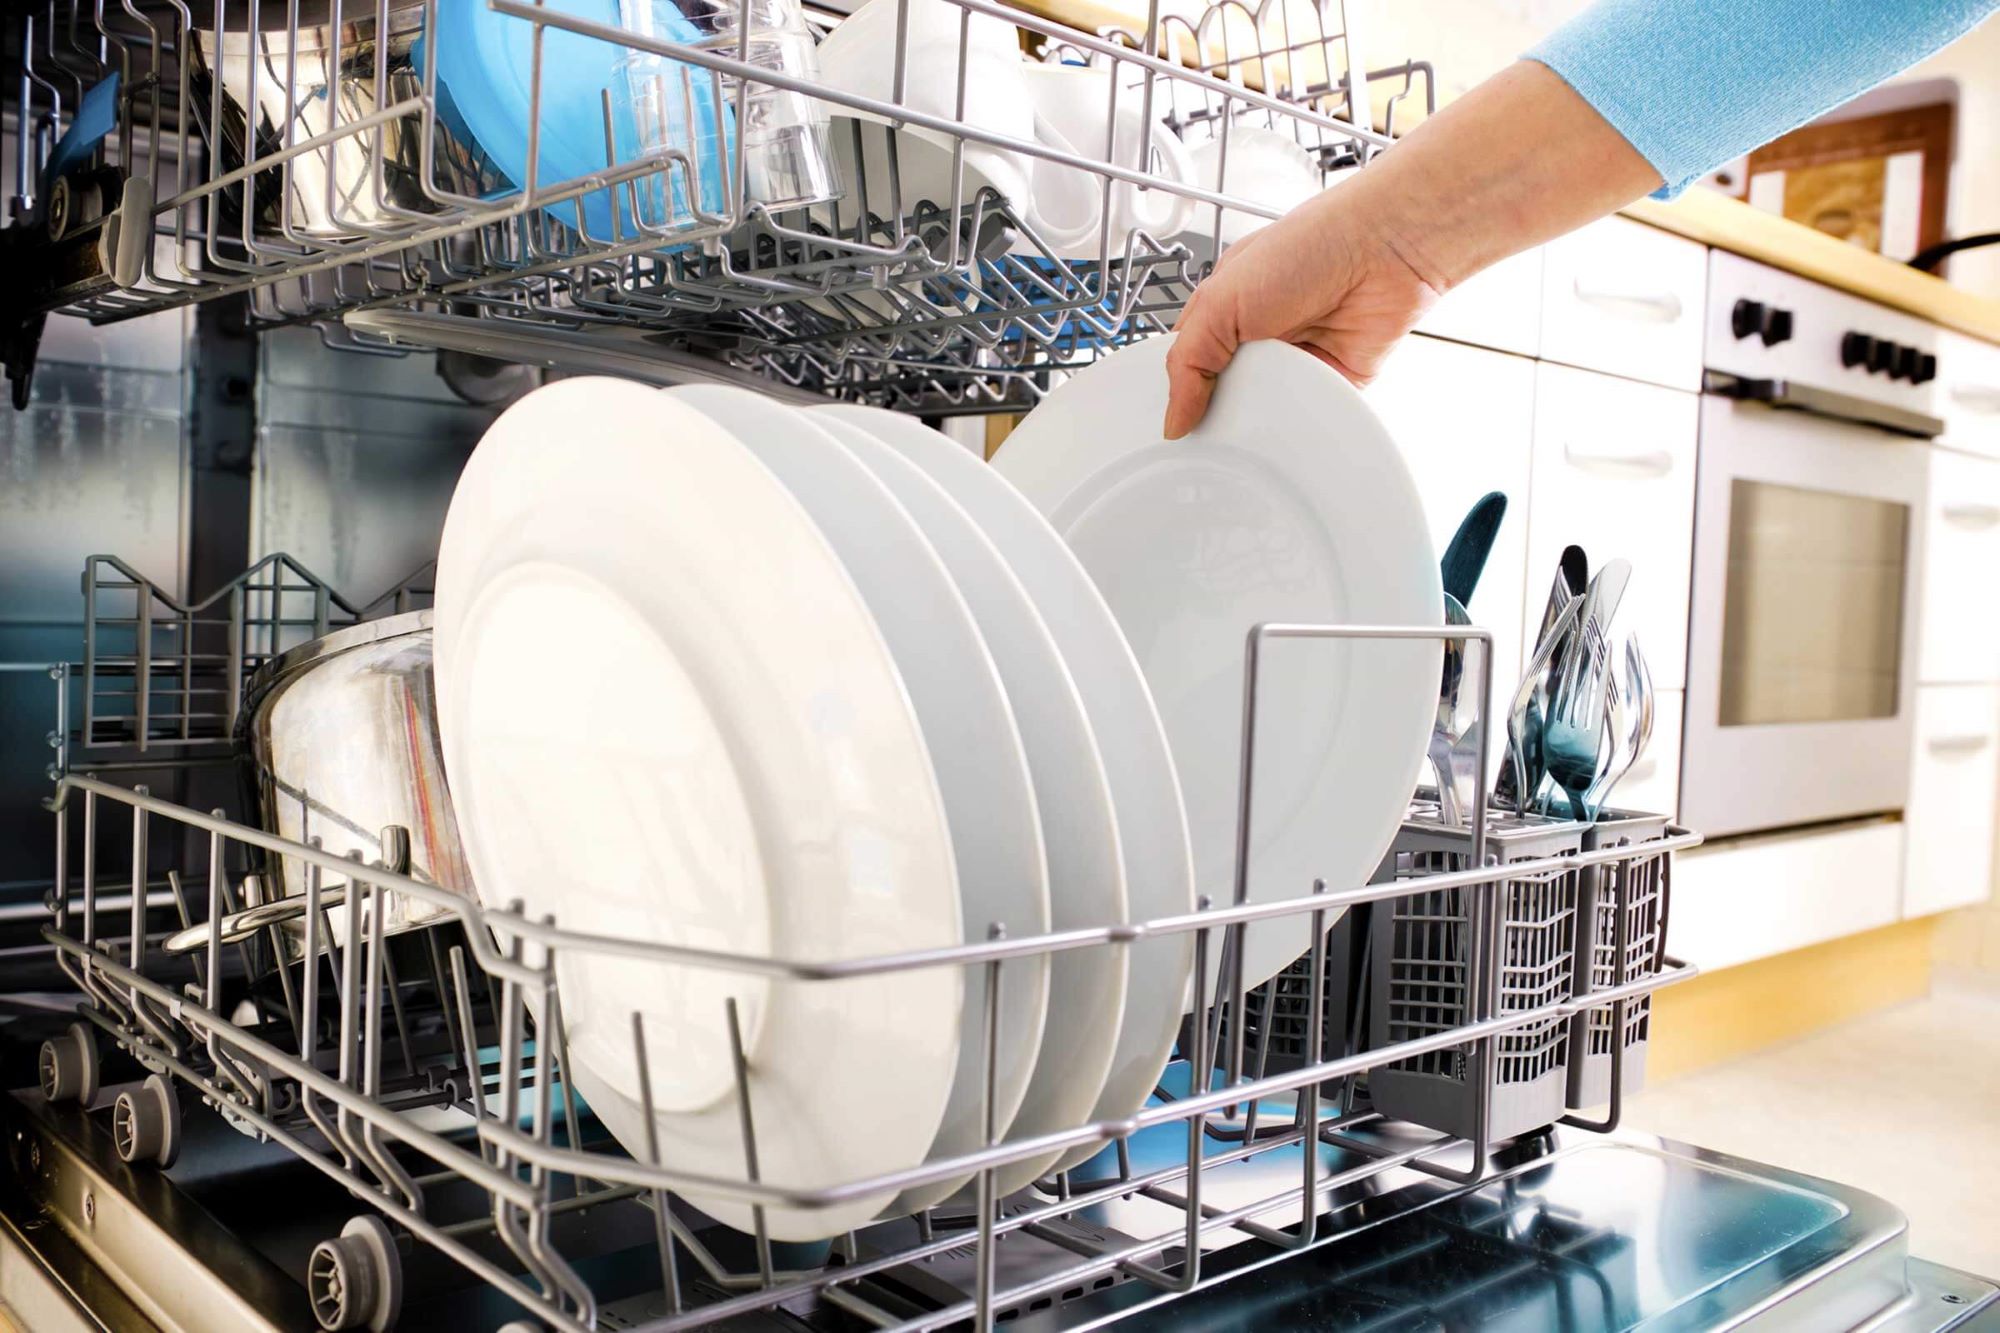 How to Load a Dishwasher 101